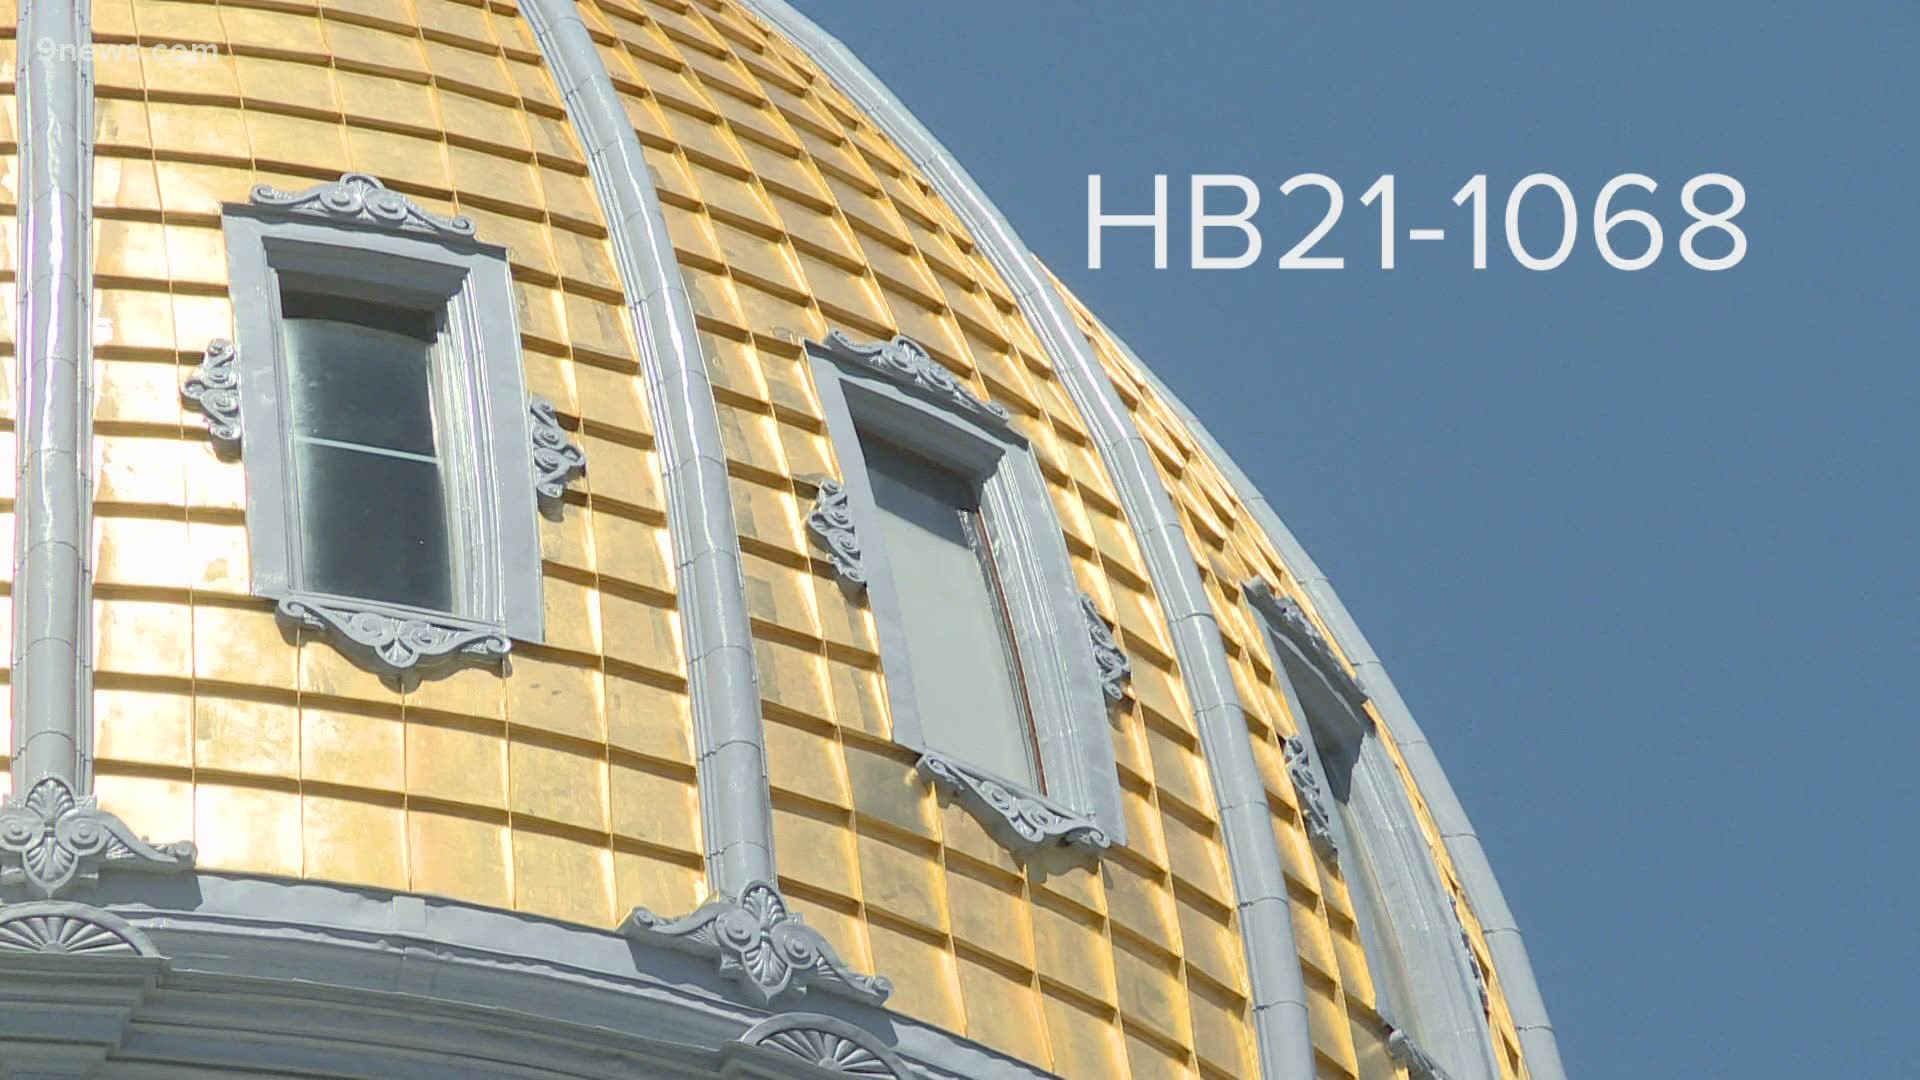 A bill moving through the Colorado legislature is aimed at breaking the cost barrier that may come with accessing mental health resources.